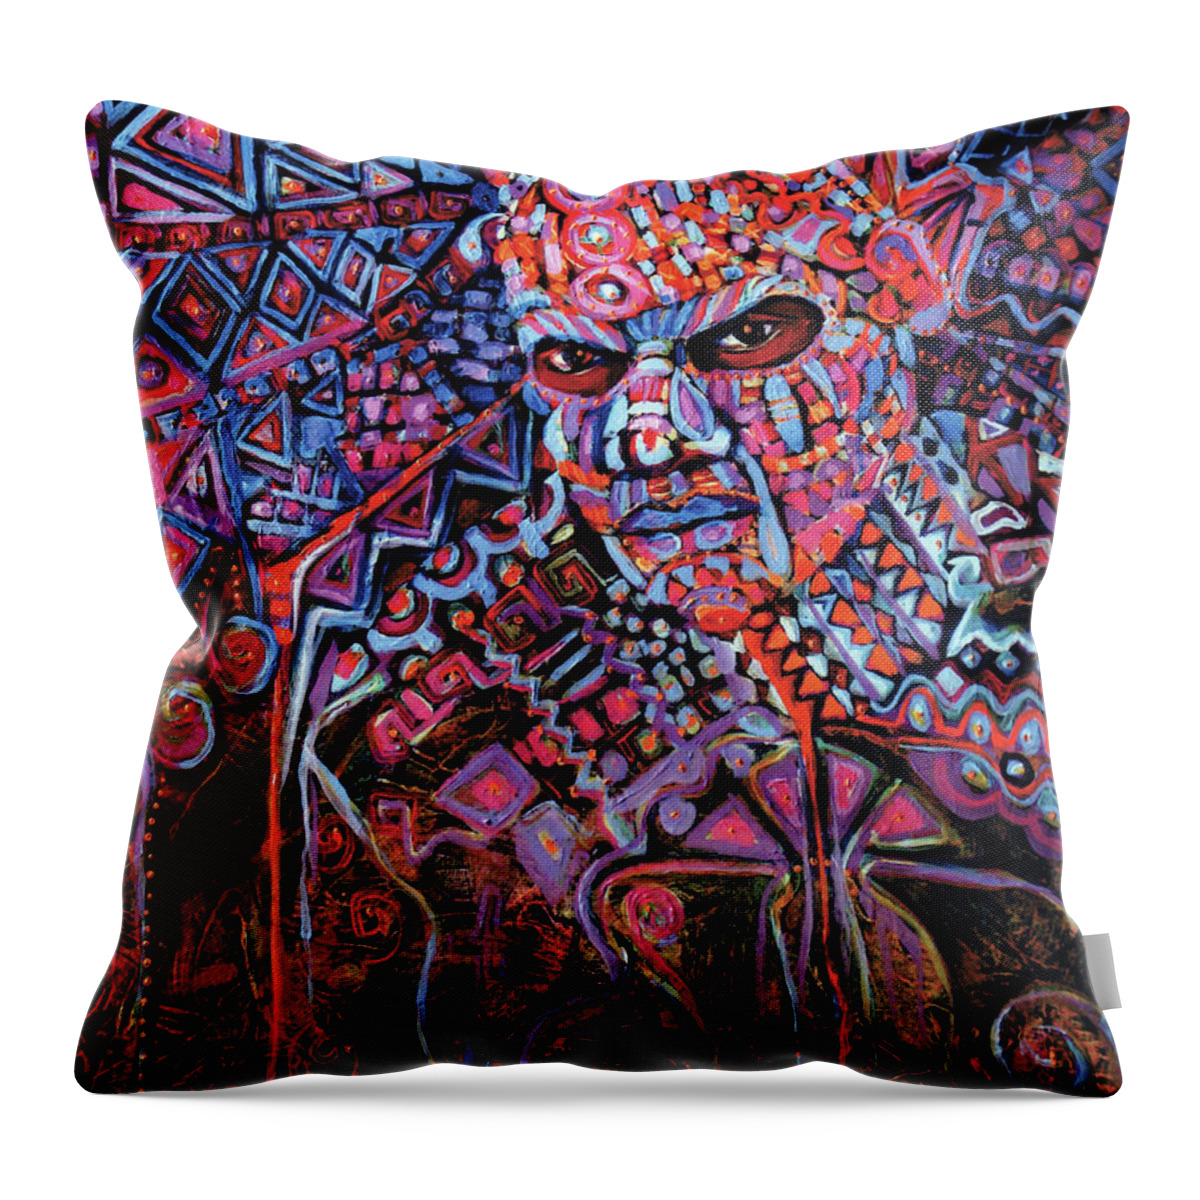 Mask Throw Pillow featuring the painting Masque Number 5 by Cora Marshall